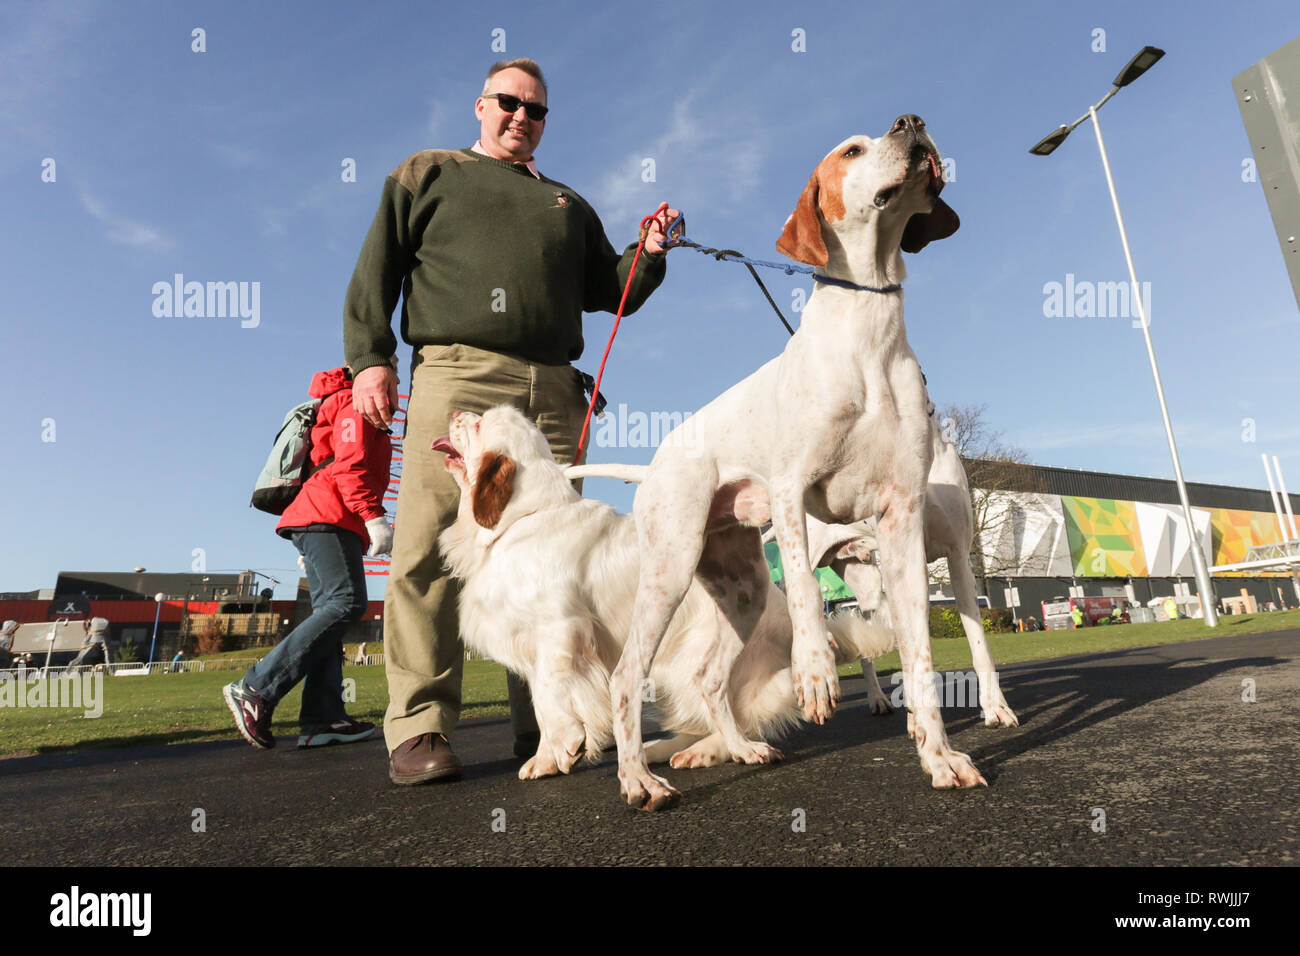 Birmingham, UK. 7th Mar, 2019. Show dogs arriving with their owners for the first day of Crufts 2019 being held at the NEC over four days. 27,000 dogs are expected to be shown over the four days, 220 different breeds, and with an estimated 165,000 dog lovers visiting. Credit: Peter Lopeman/Alamy Live News Stock Photo